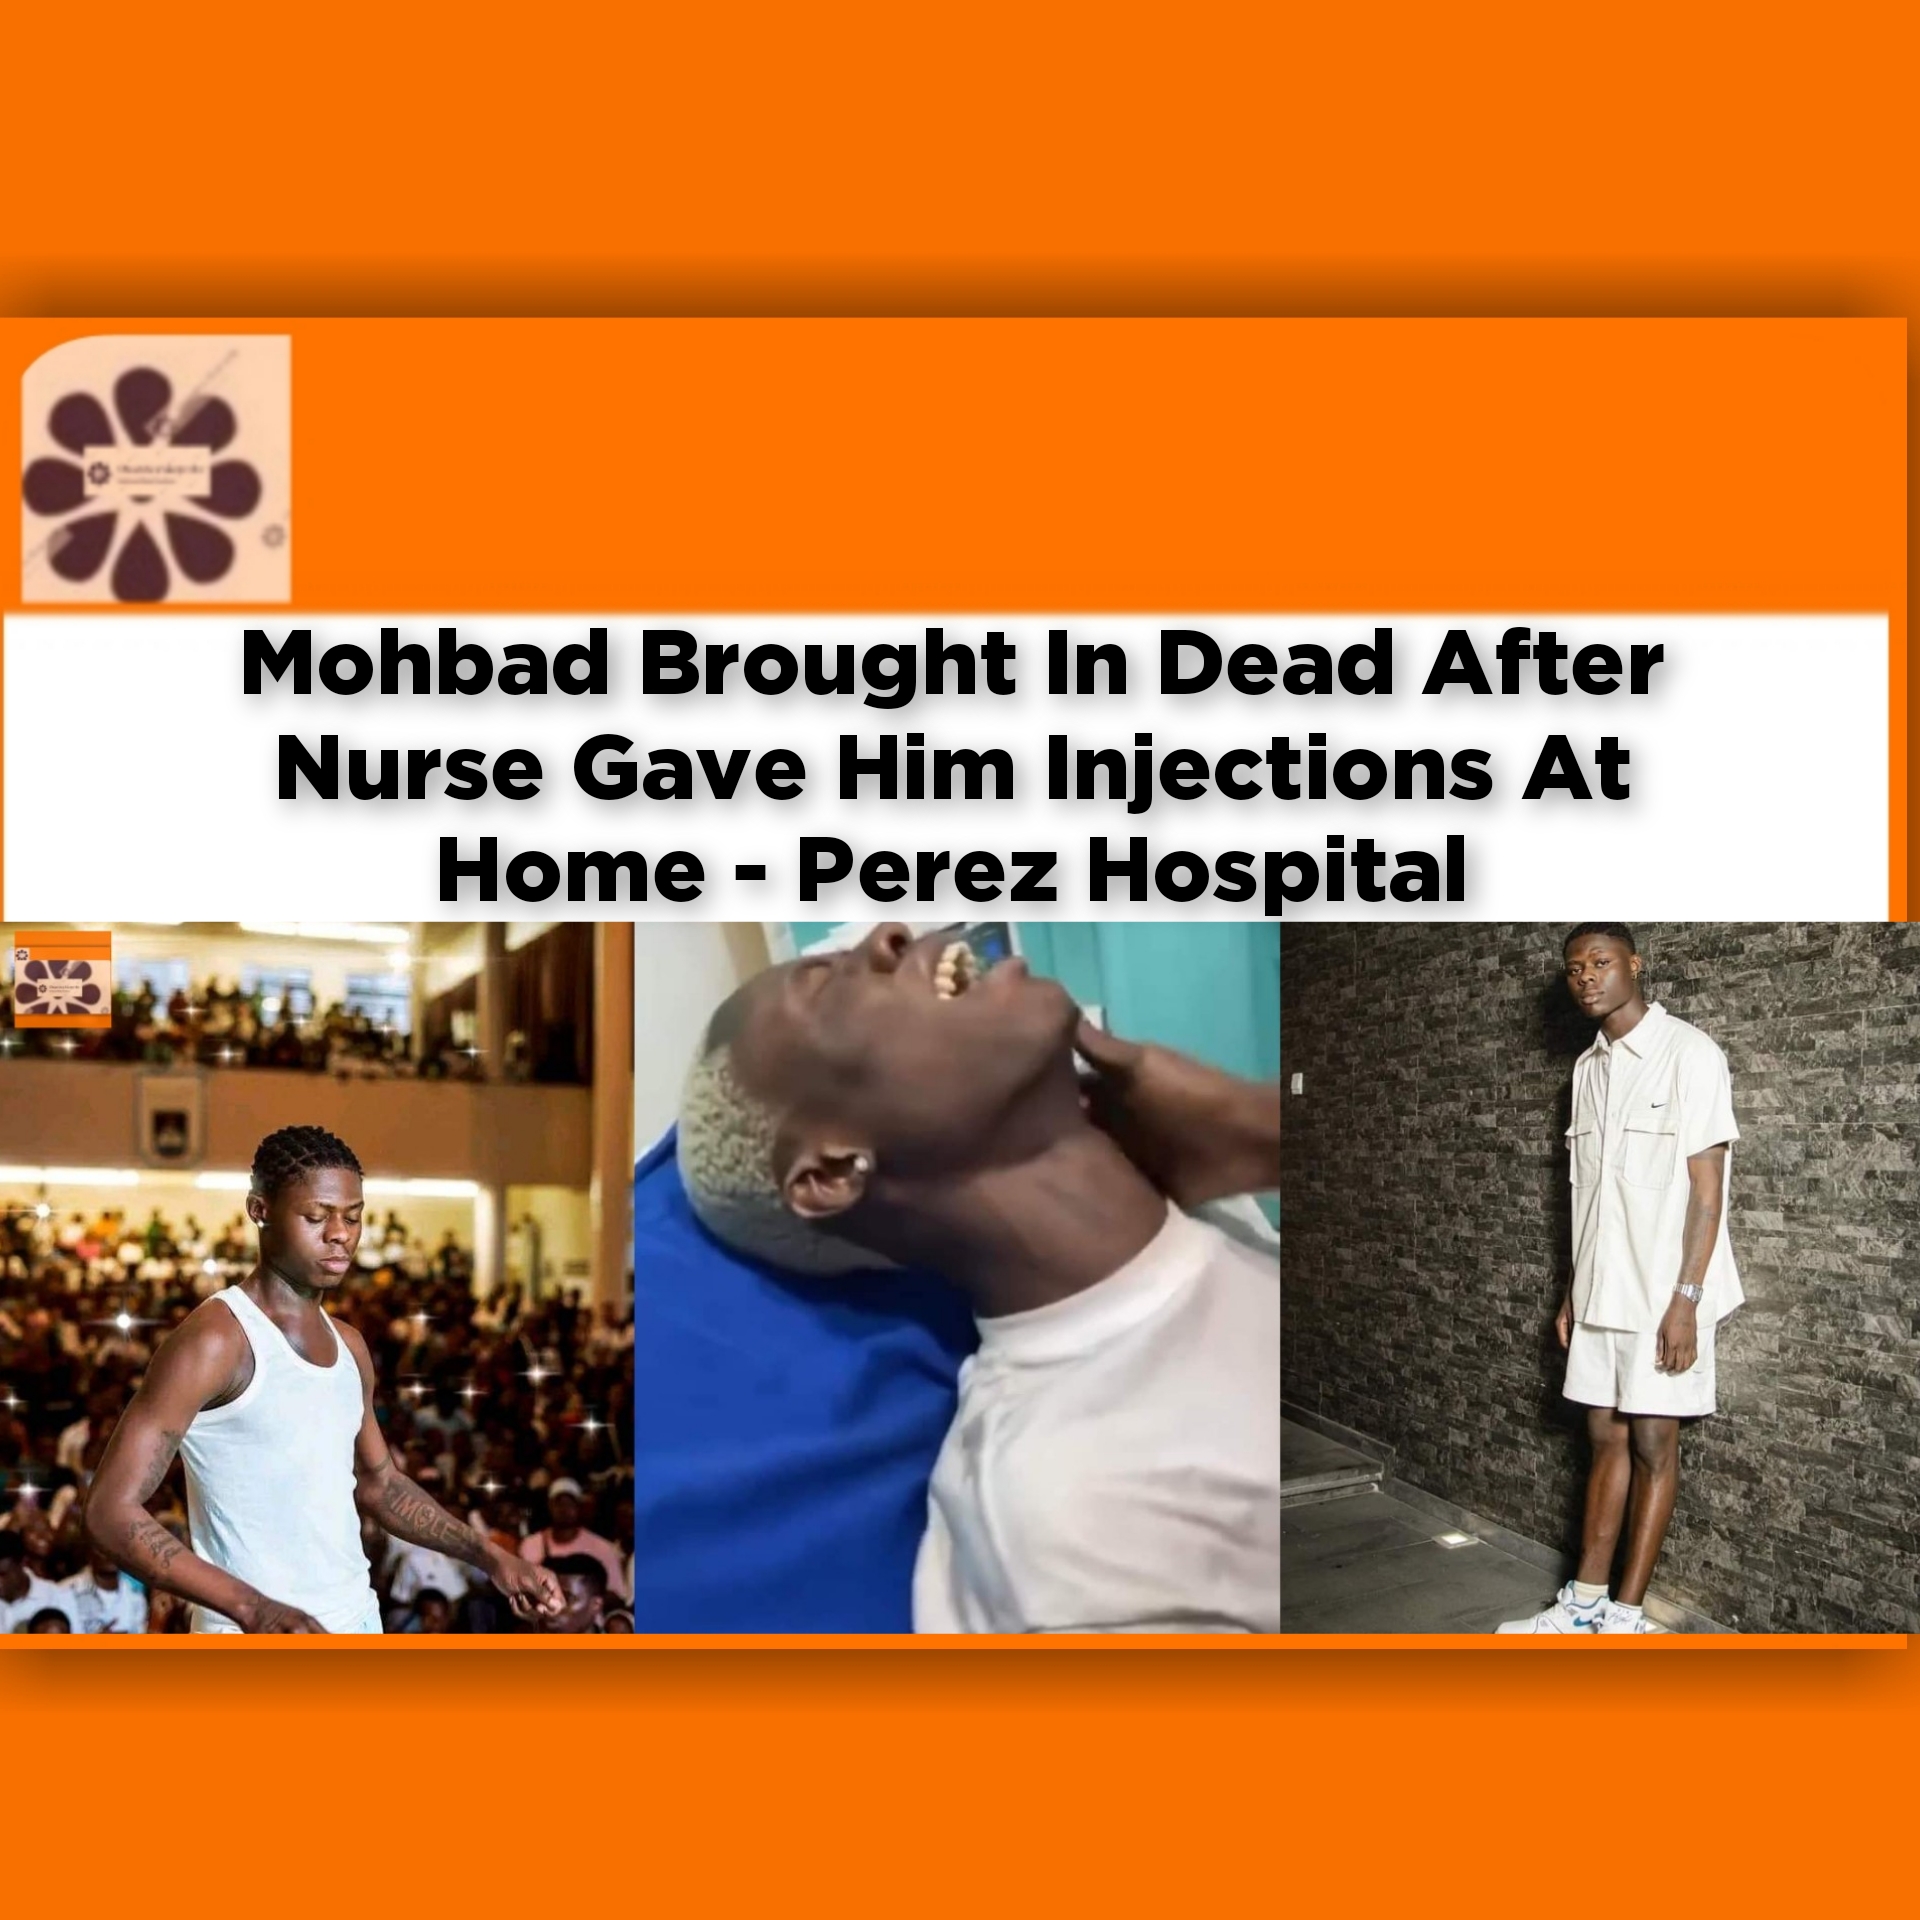 Mohbad Brought In Dead After Nurse Gave Him Injections At Home - Perez Hospital ~ OsazuwaAkonedo #Lagos #Mohbad #Perez About,Editorial Policy,OsazuwaAkonedo